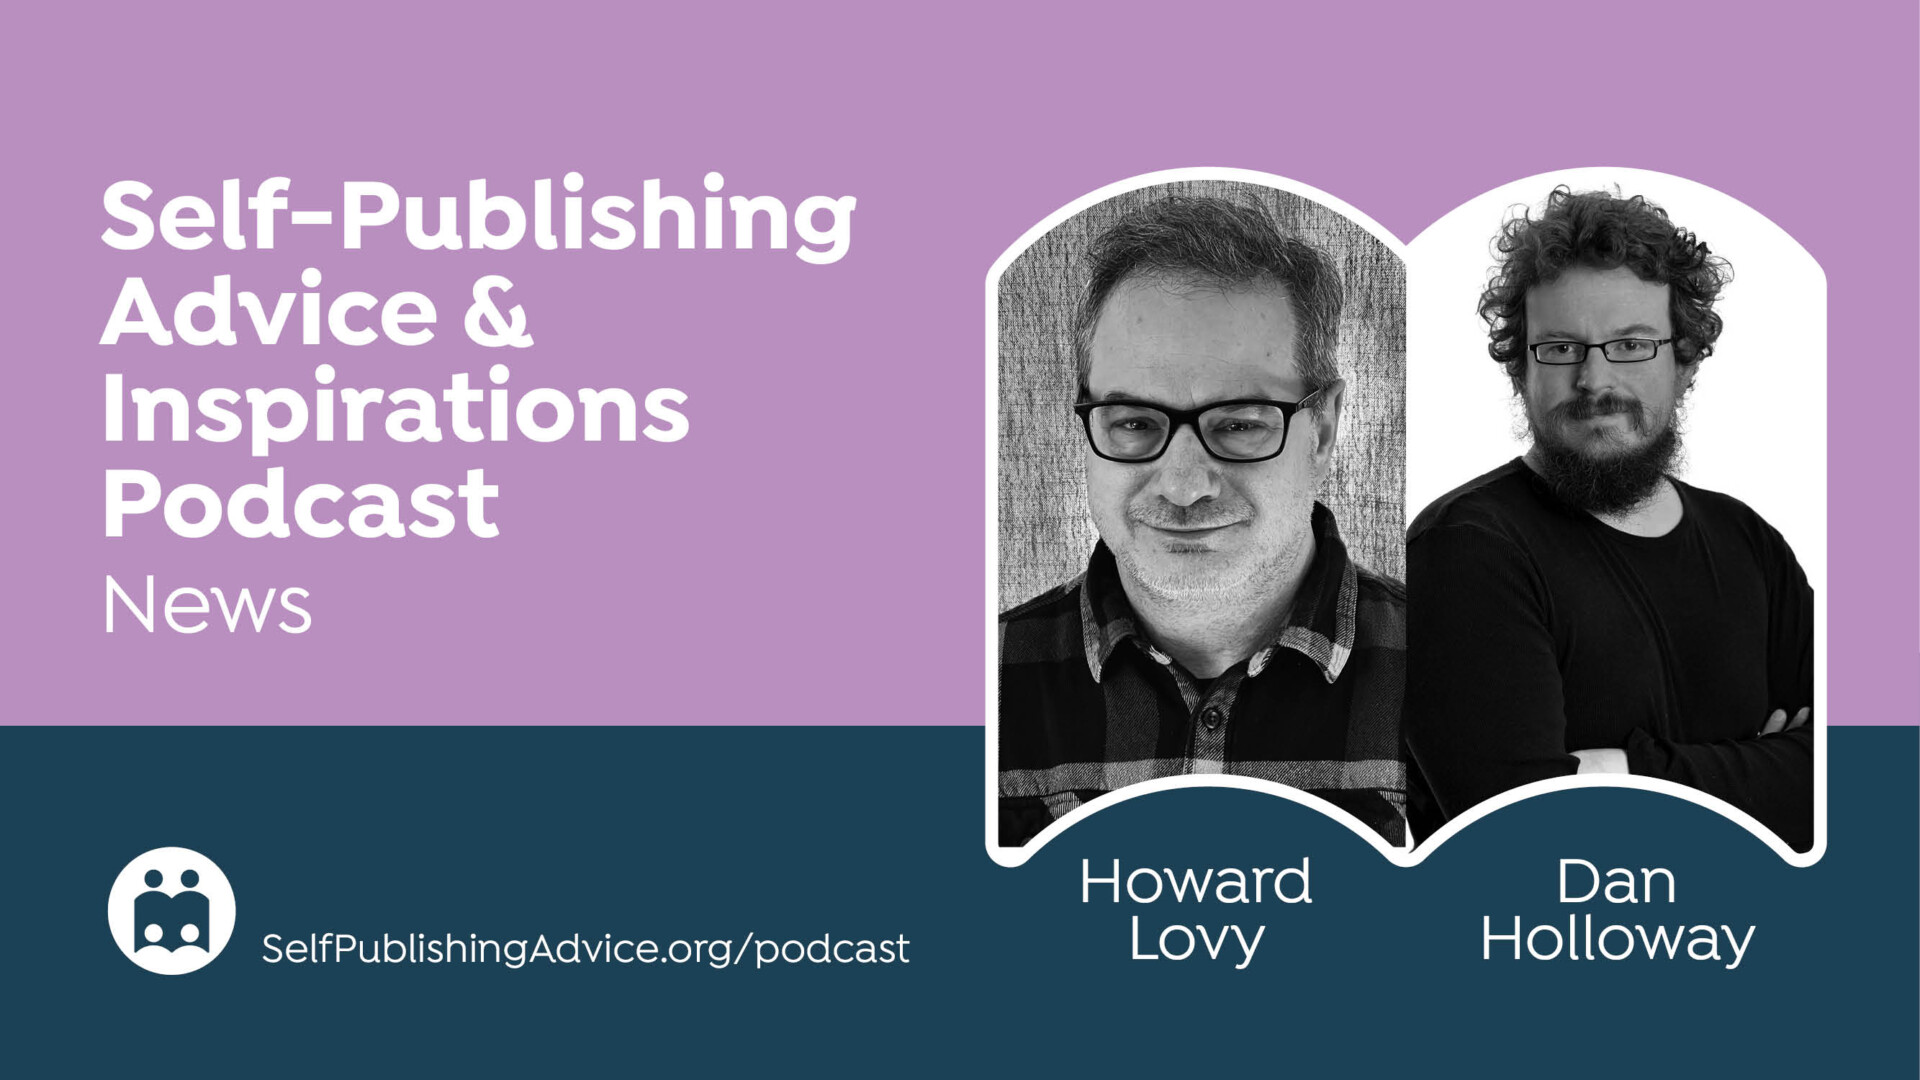 ALLi Income Survey Has Good News For Indie Authors; Also, Can You Sue ChatGPT For Libel? Self-Publishing News Podcast With Dan Holloway And Howard Lovy